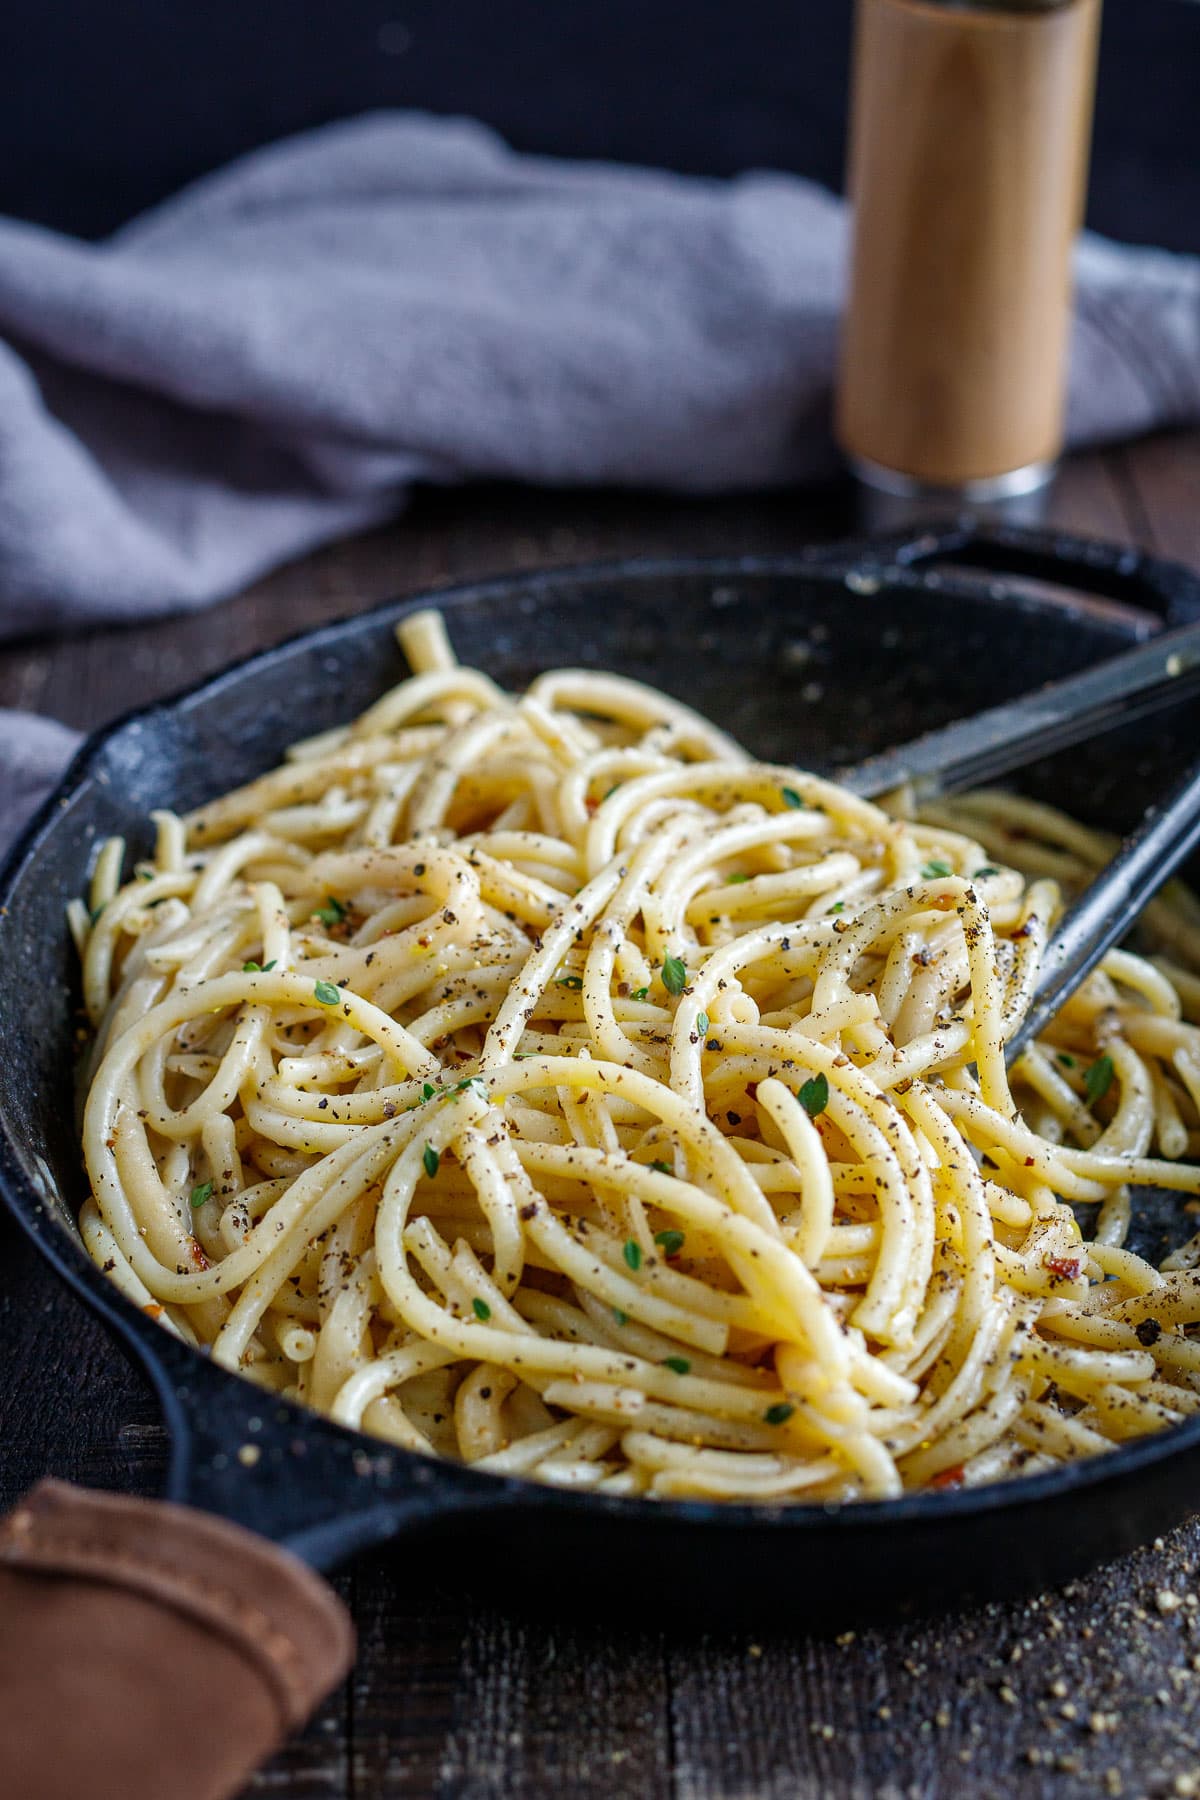 A simple, authentic recipe for Cacio e Pepe - a classic Roman pasta recipe with only 4 ingredients, that can be made in 20 minutes flat. 